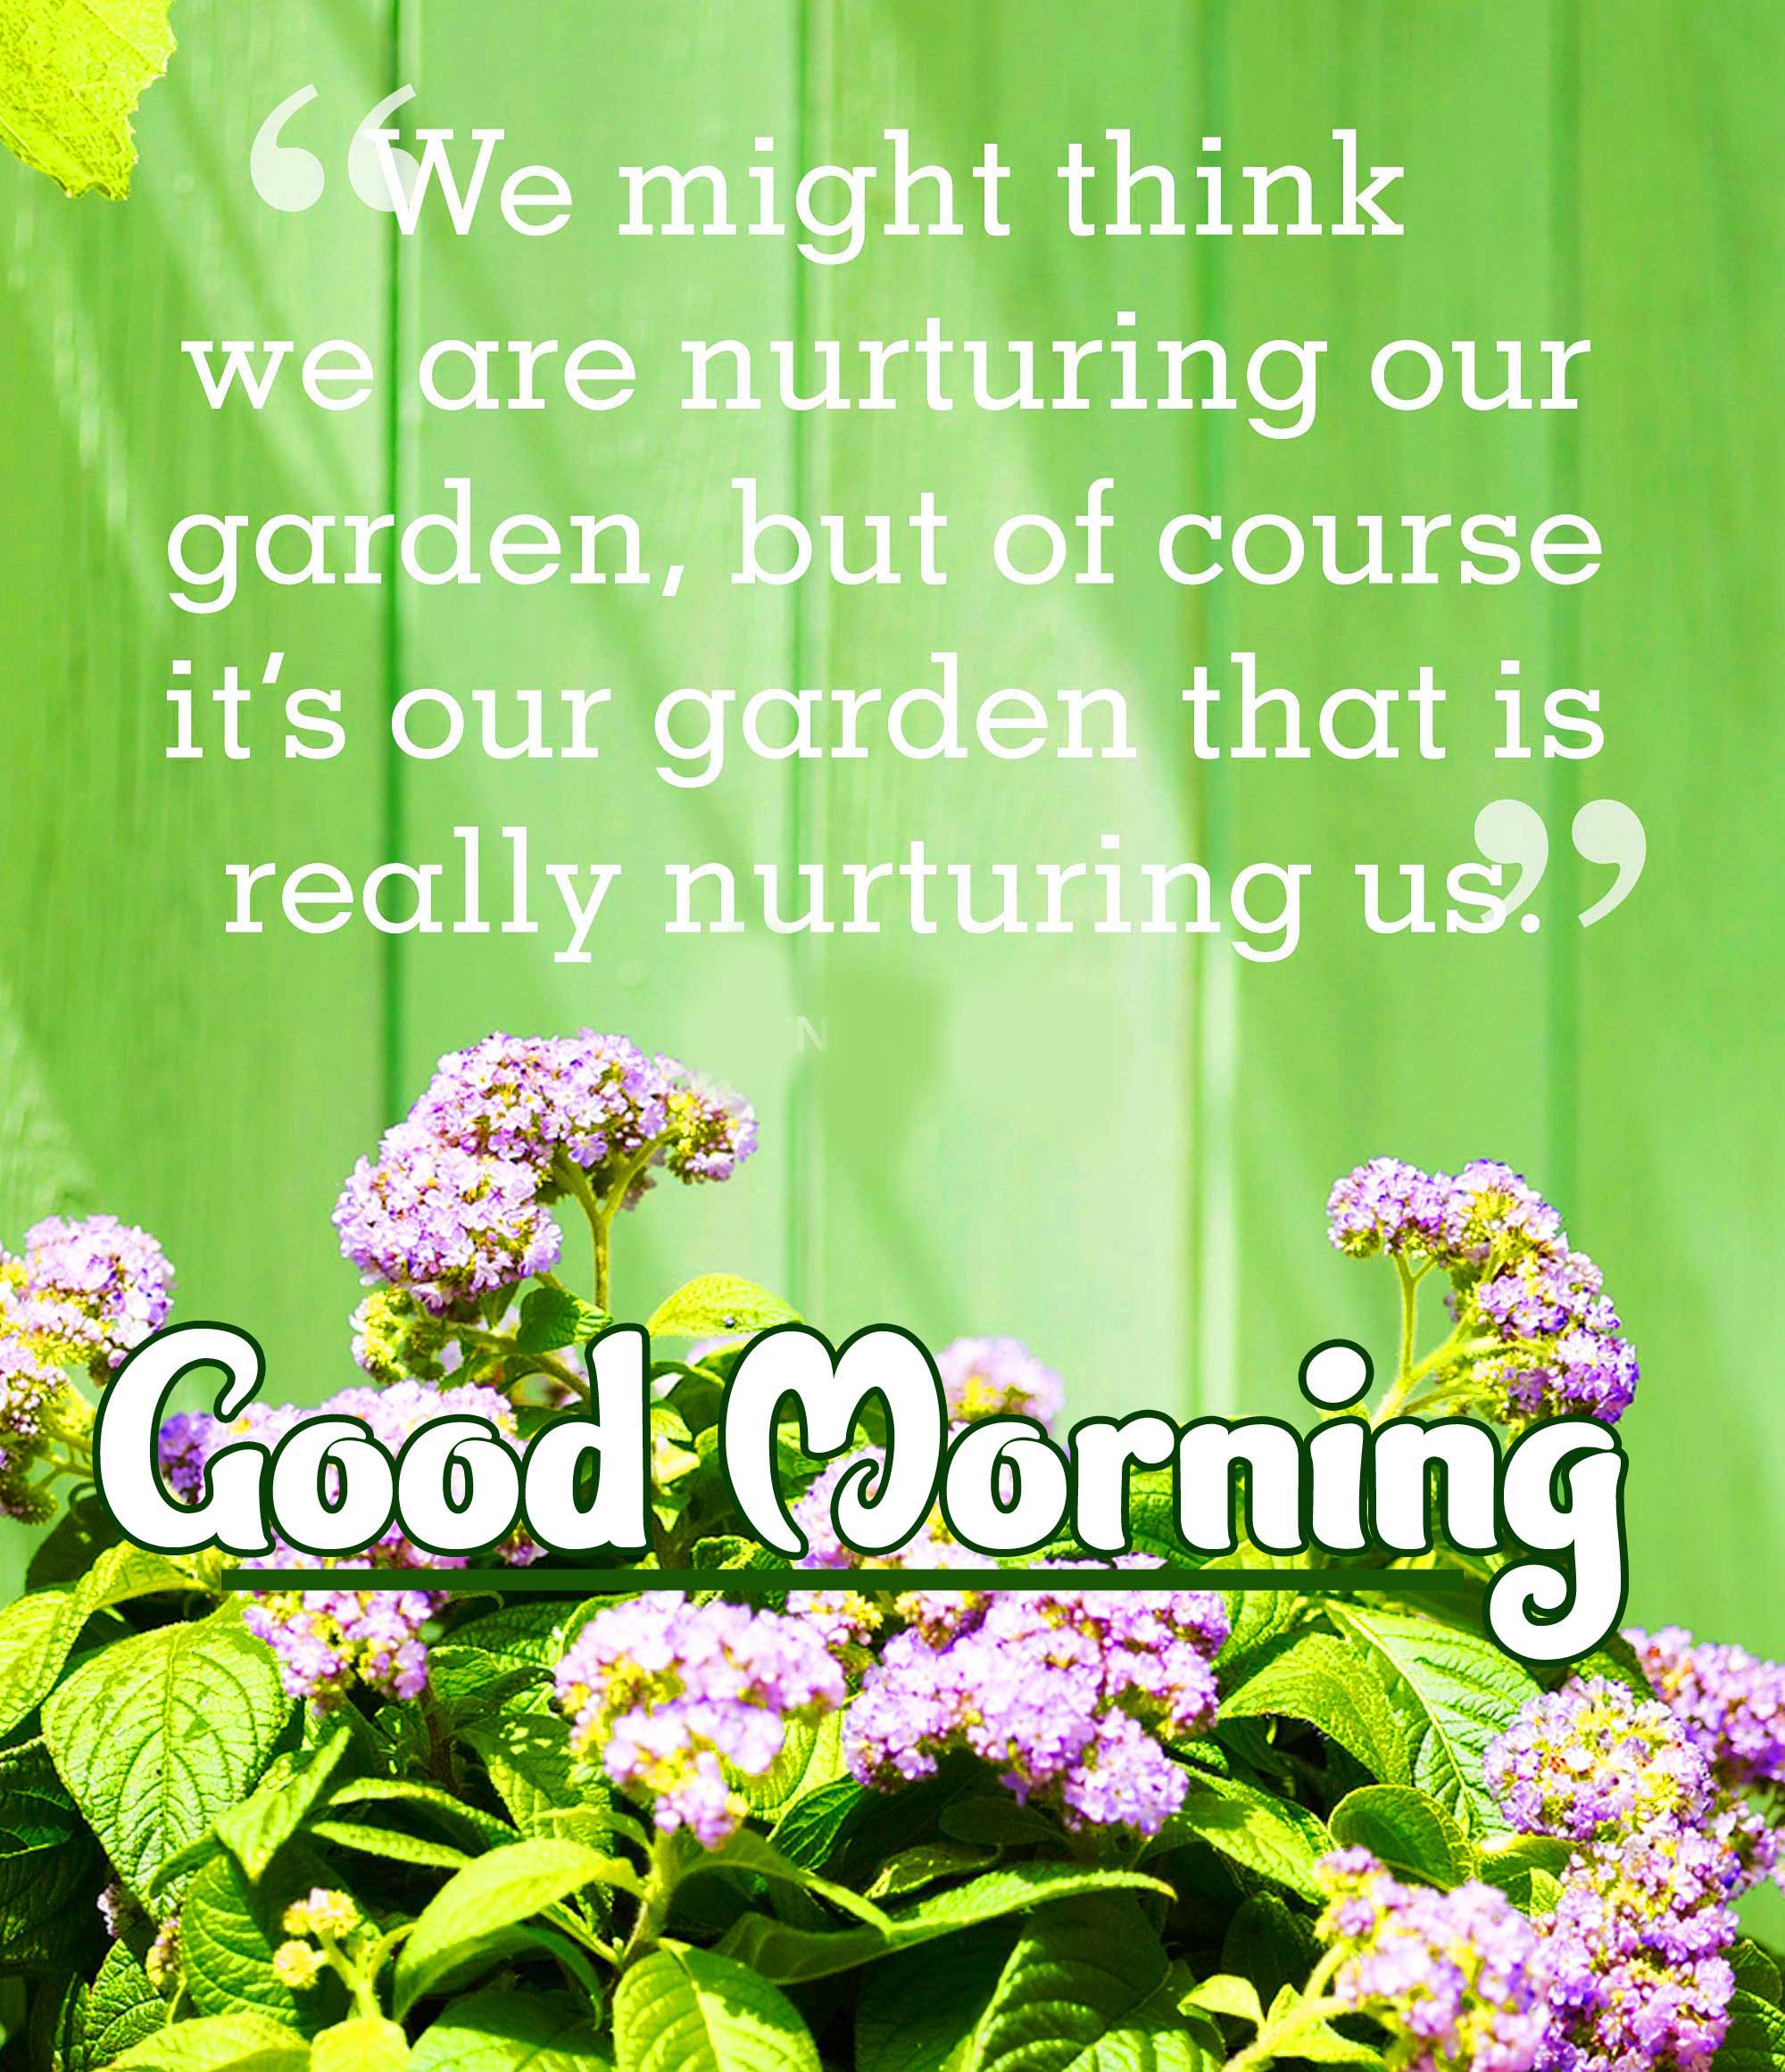 Good Morning Images with English Thought Wallpaper free Download 